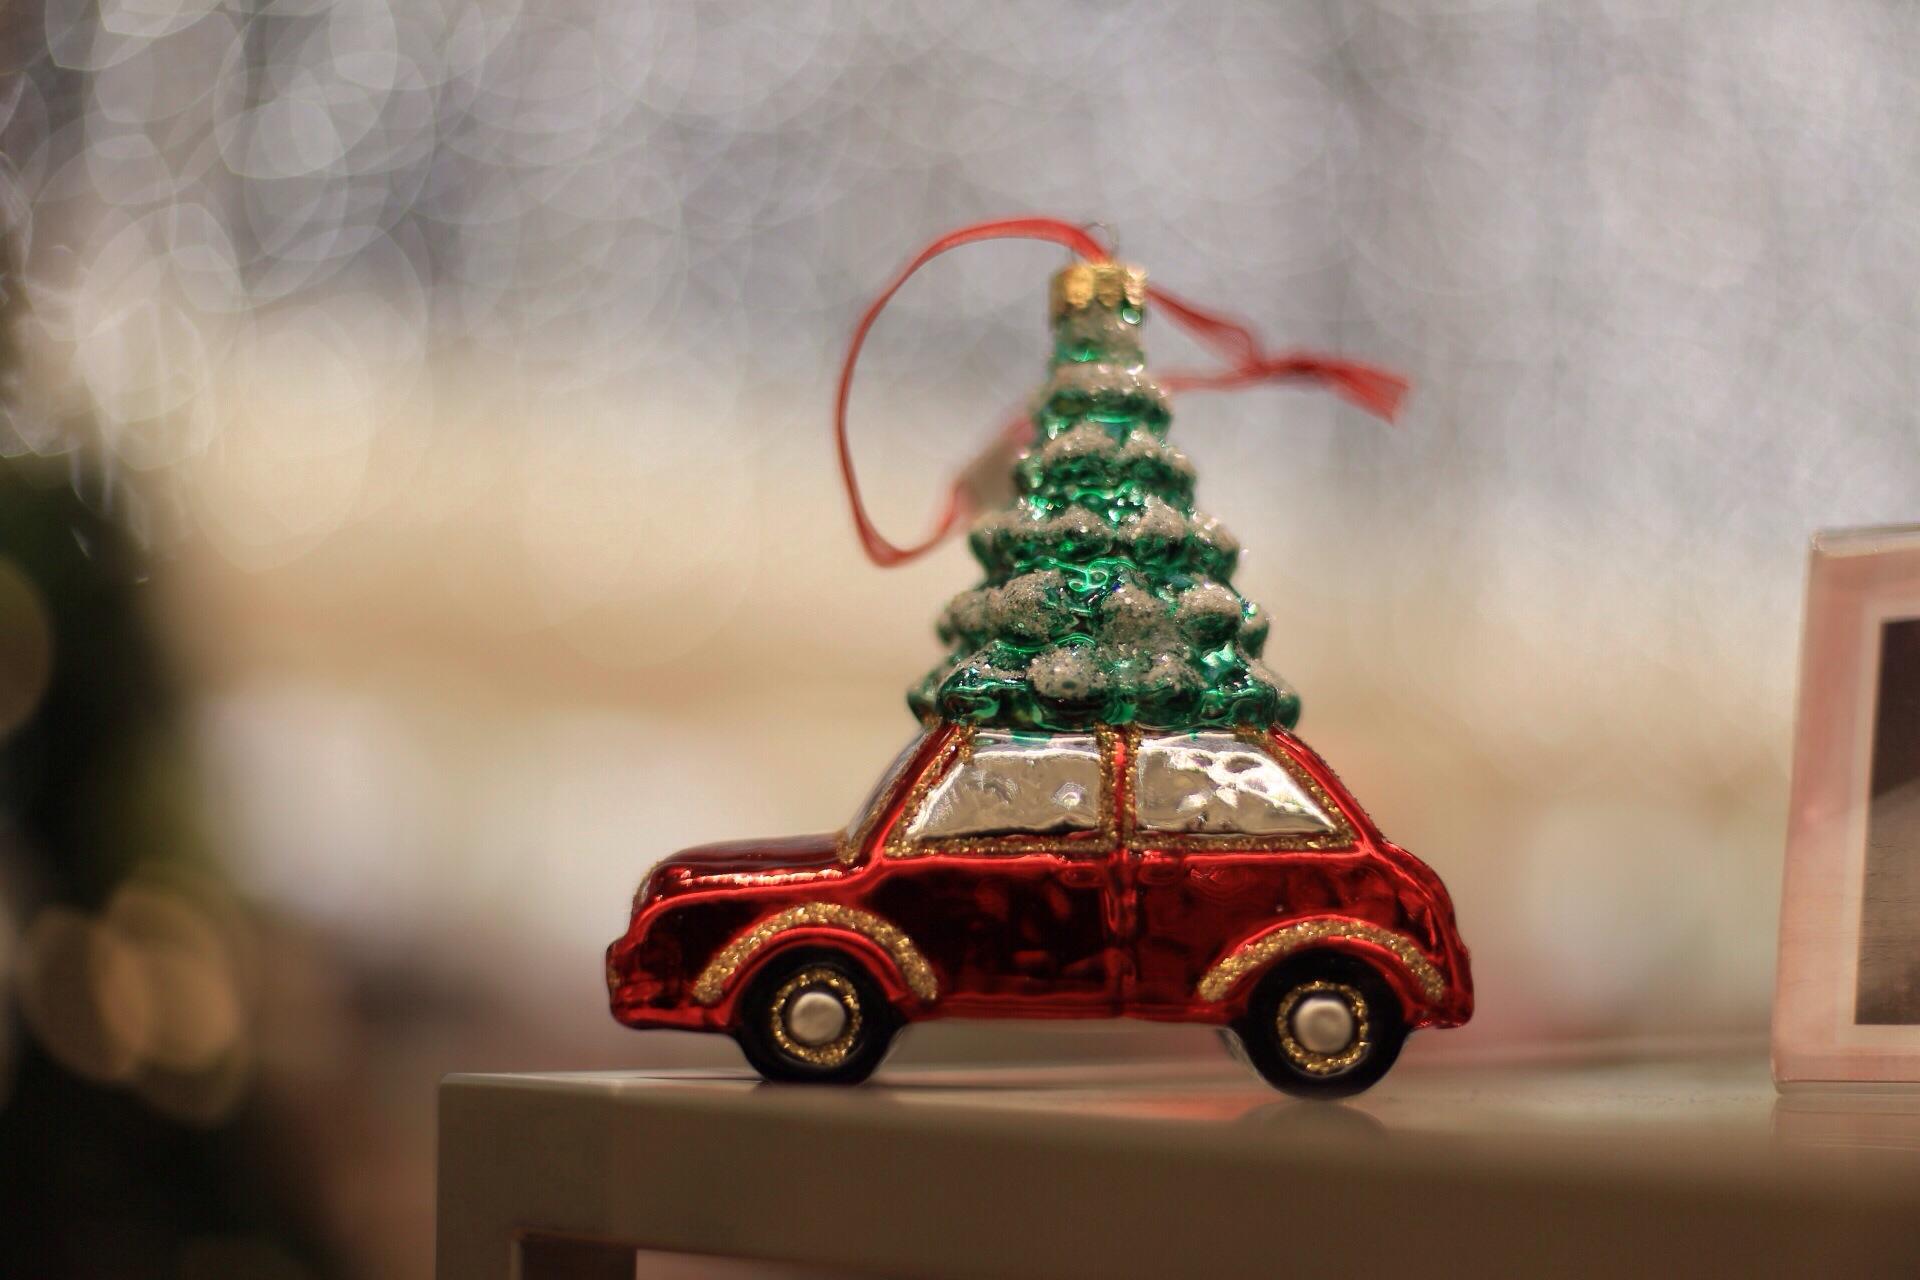 Your car can also take part in the holiday festivities.